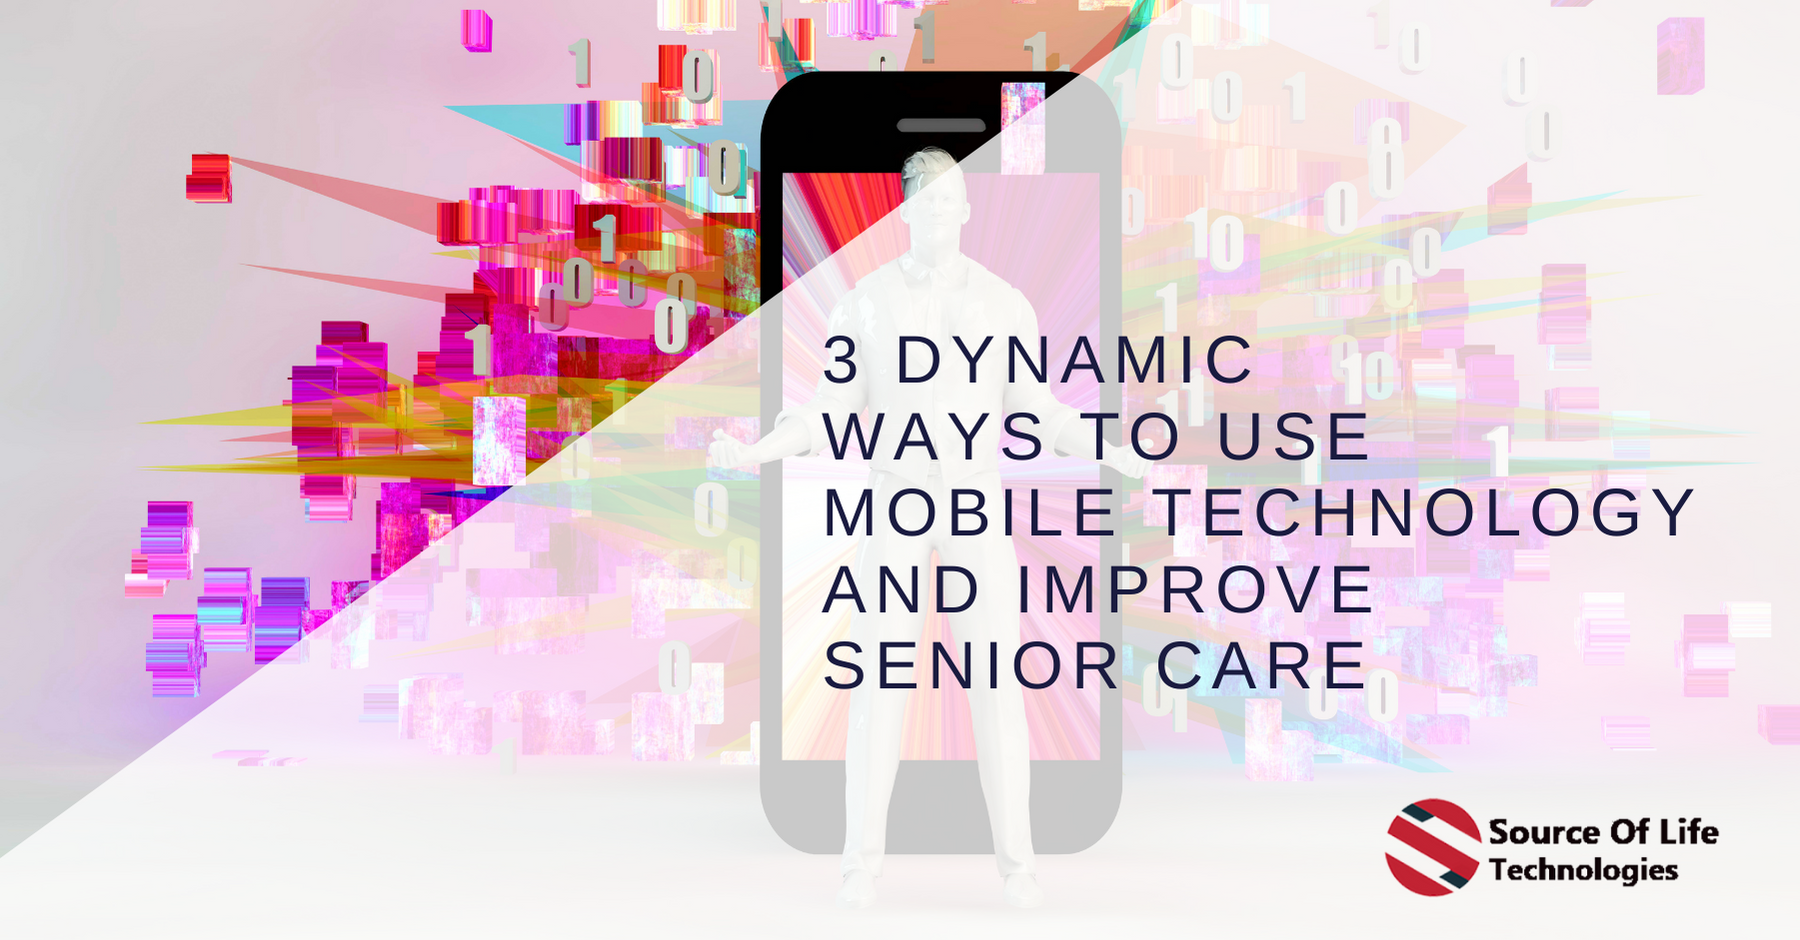 3 Dynamic Ways to Use Mobile Technology and Improve Senior Care